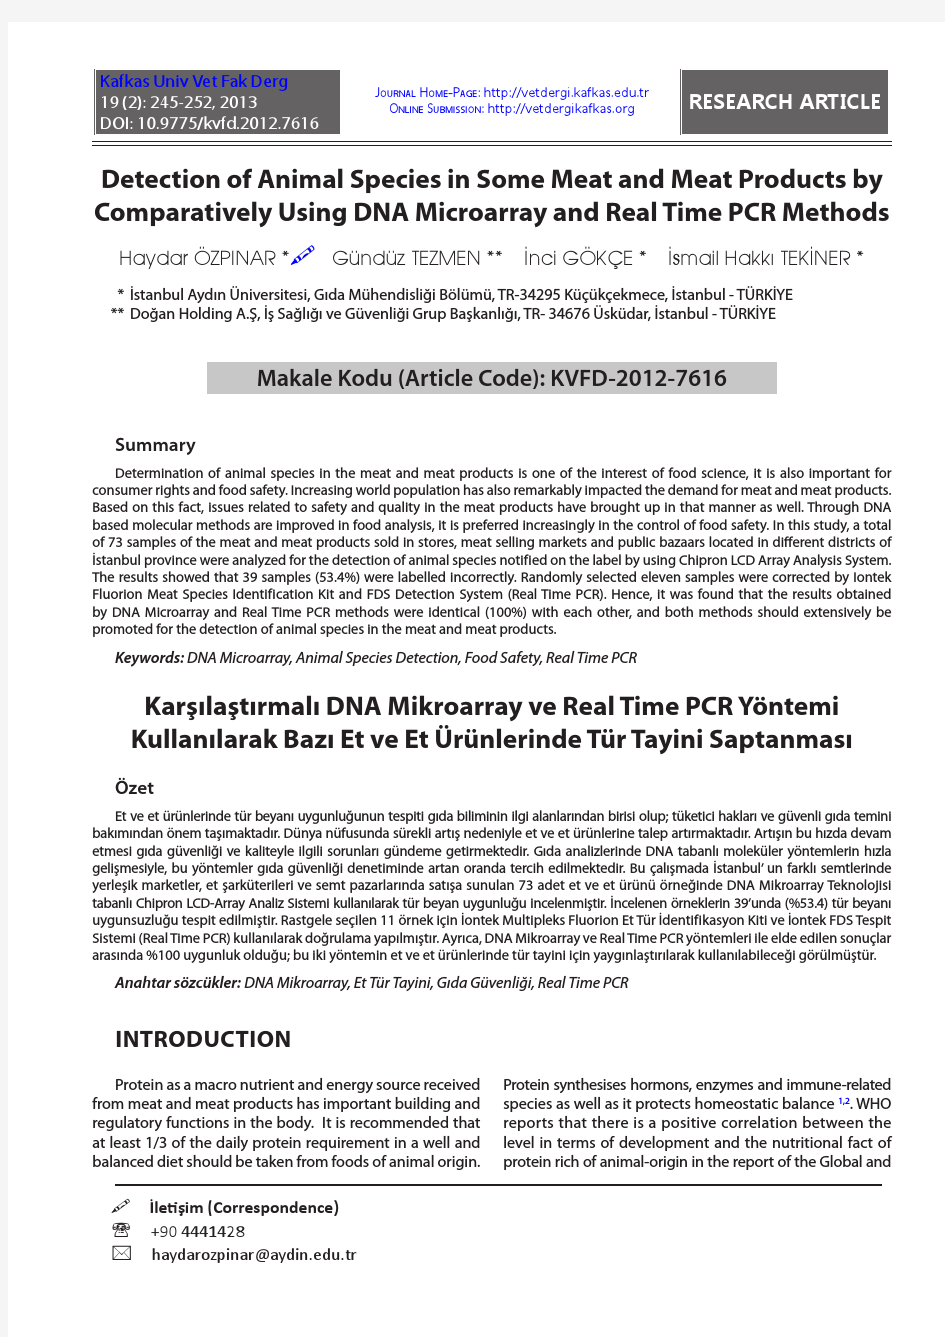 Detection of Animal Species in Some Meat and Meat Products by Using DNA Microarray and RT PCR